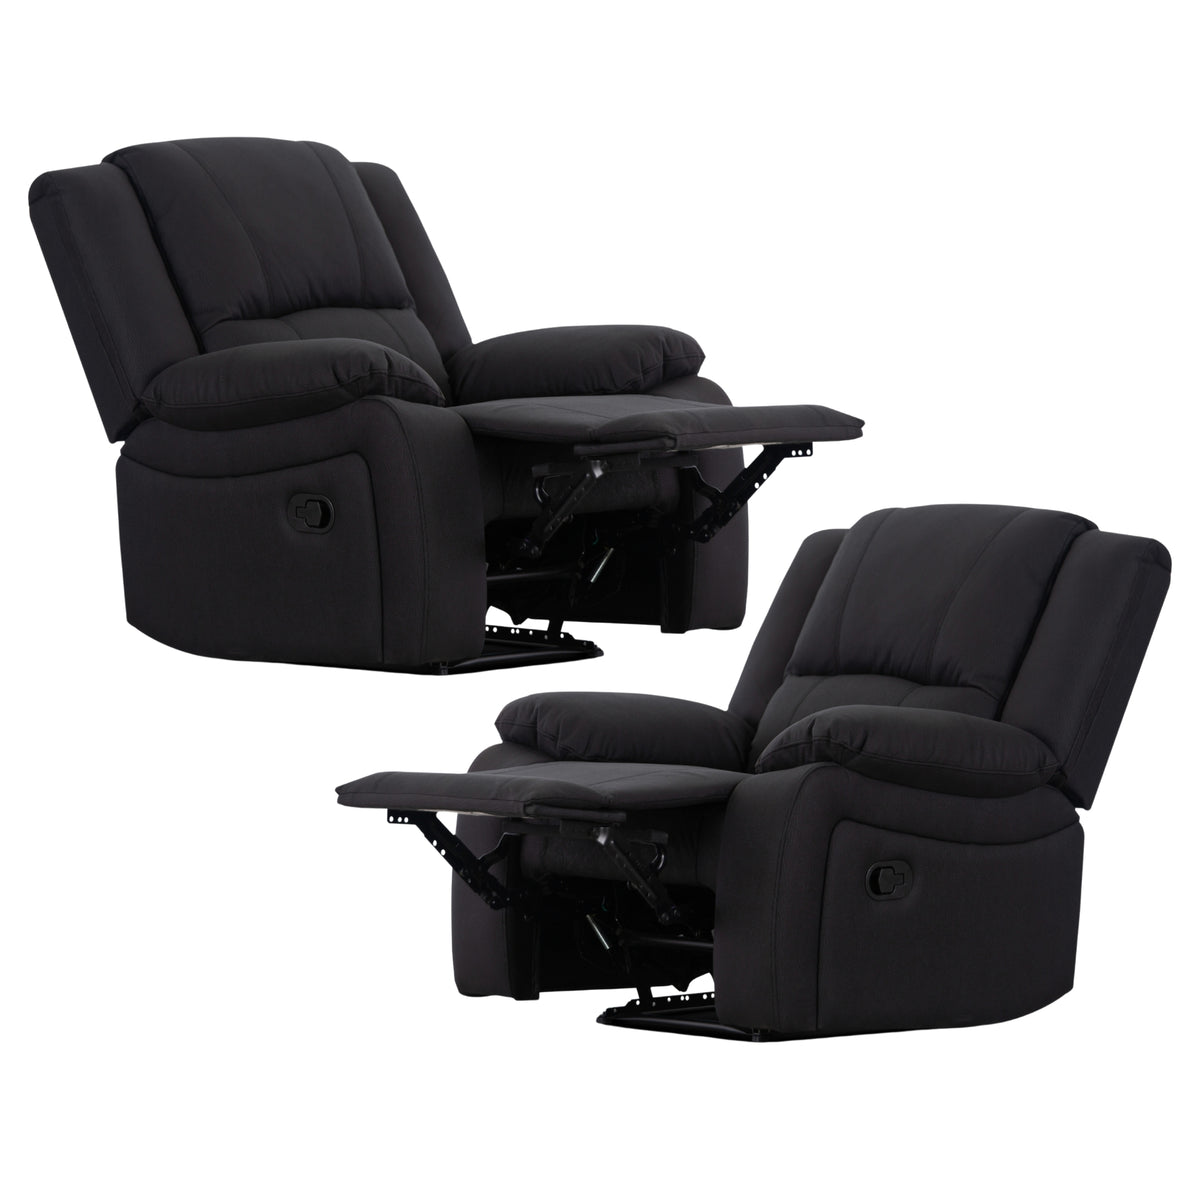 Anderson Fabric Electric Recliner Sofa Lounge Chair ONYX Black 1 + 1 Seater